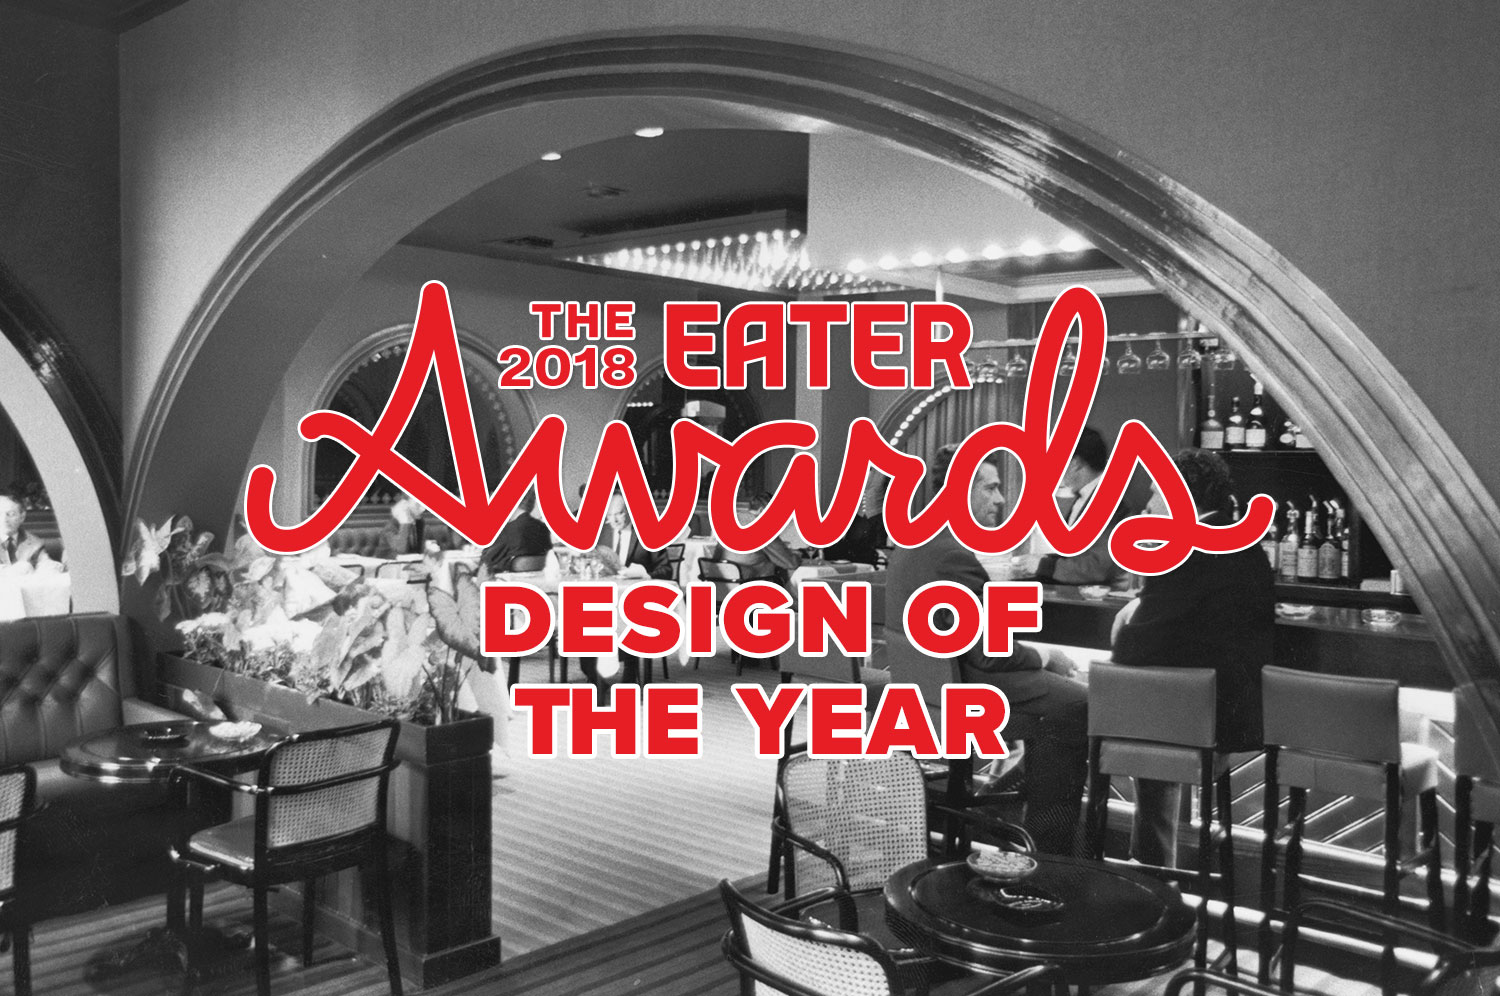 Which is the prettiest restaurant of the year?